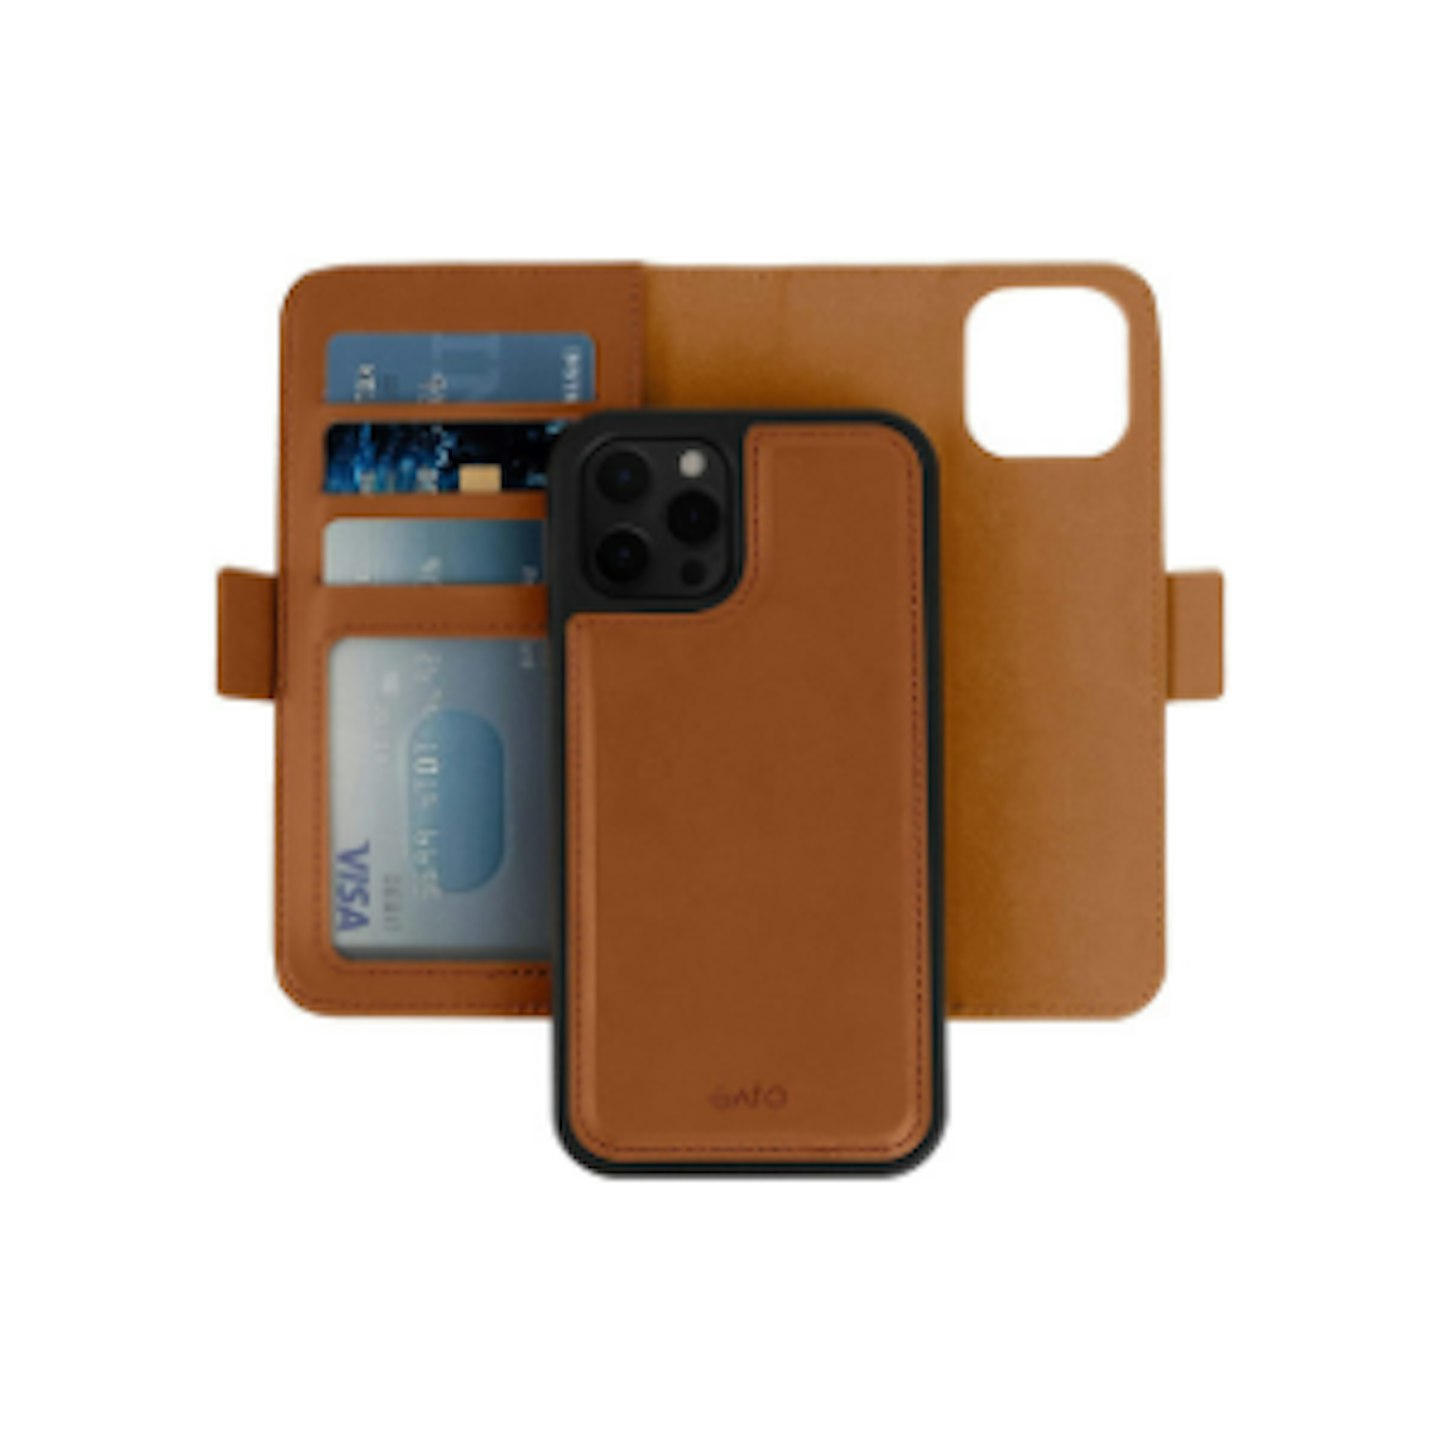 iATO 2-in-1 Leather iPhone 12 Pro Max Case Wallet